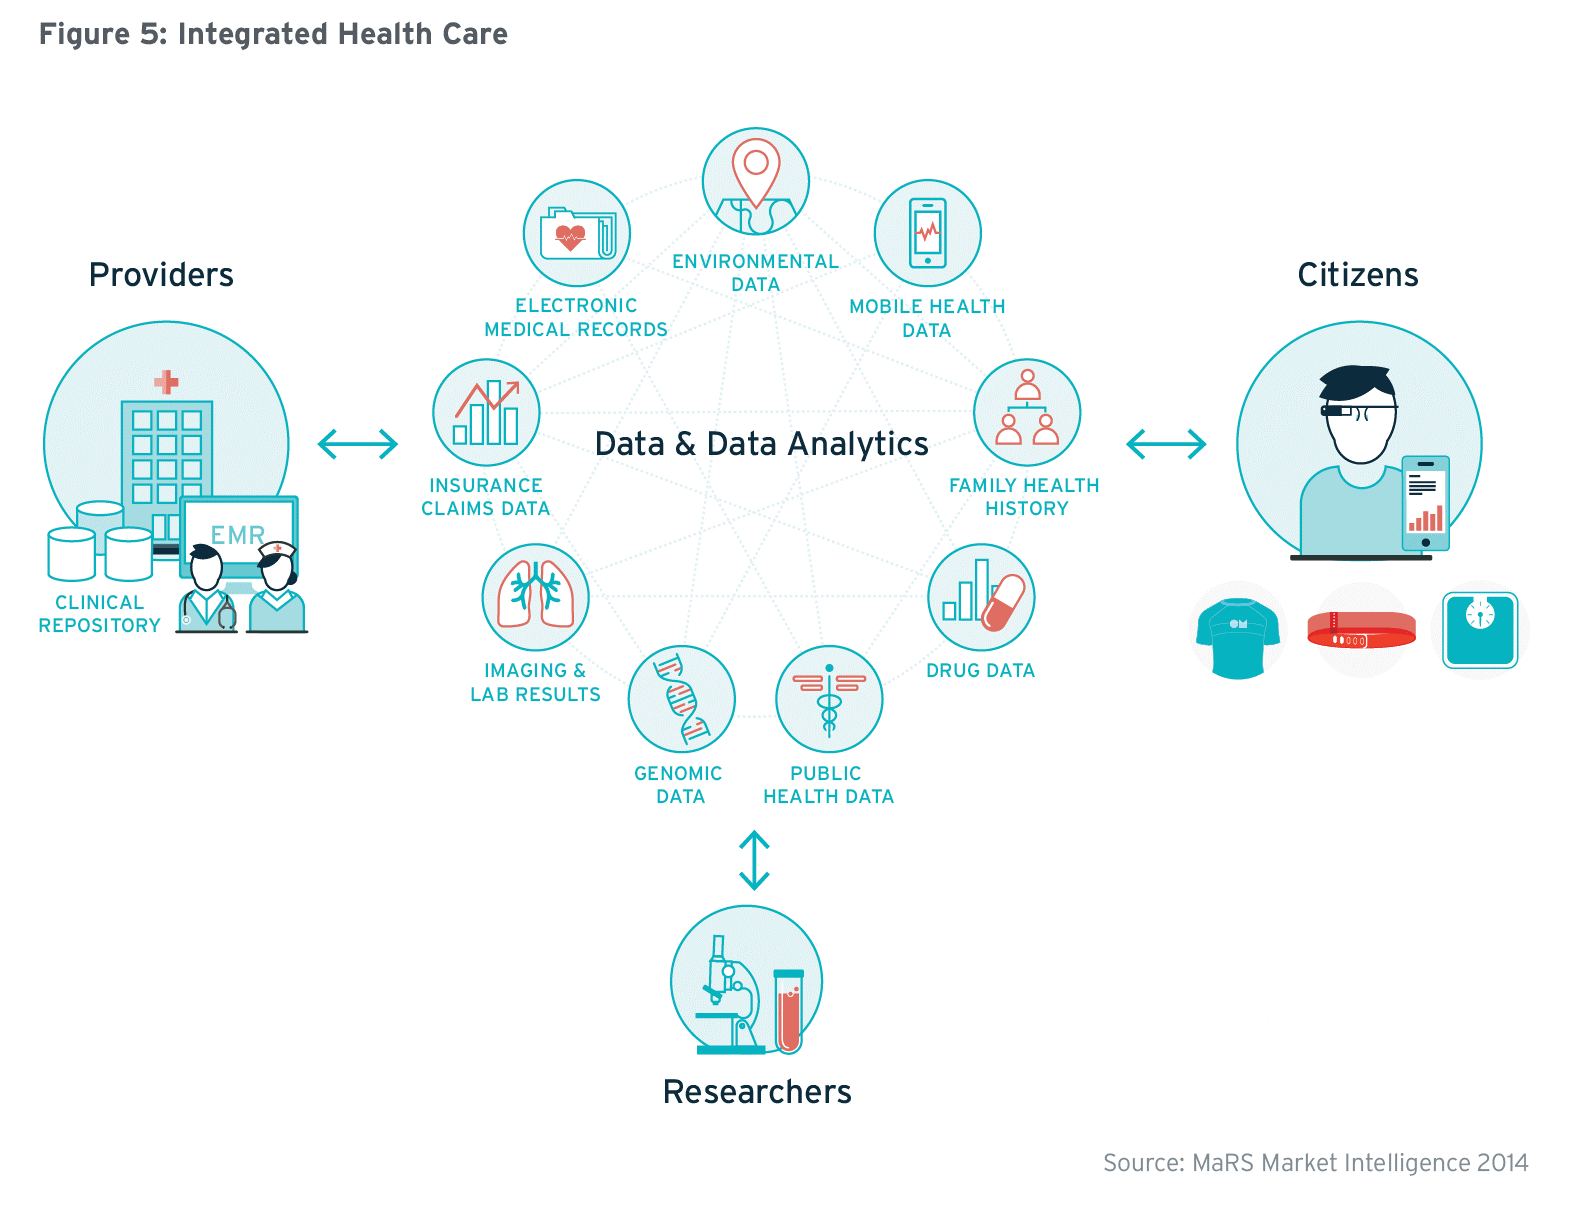 Transforming Health - Decentralized and Connected